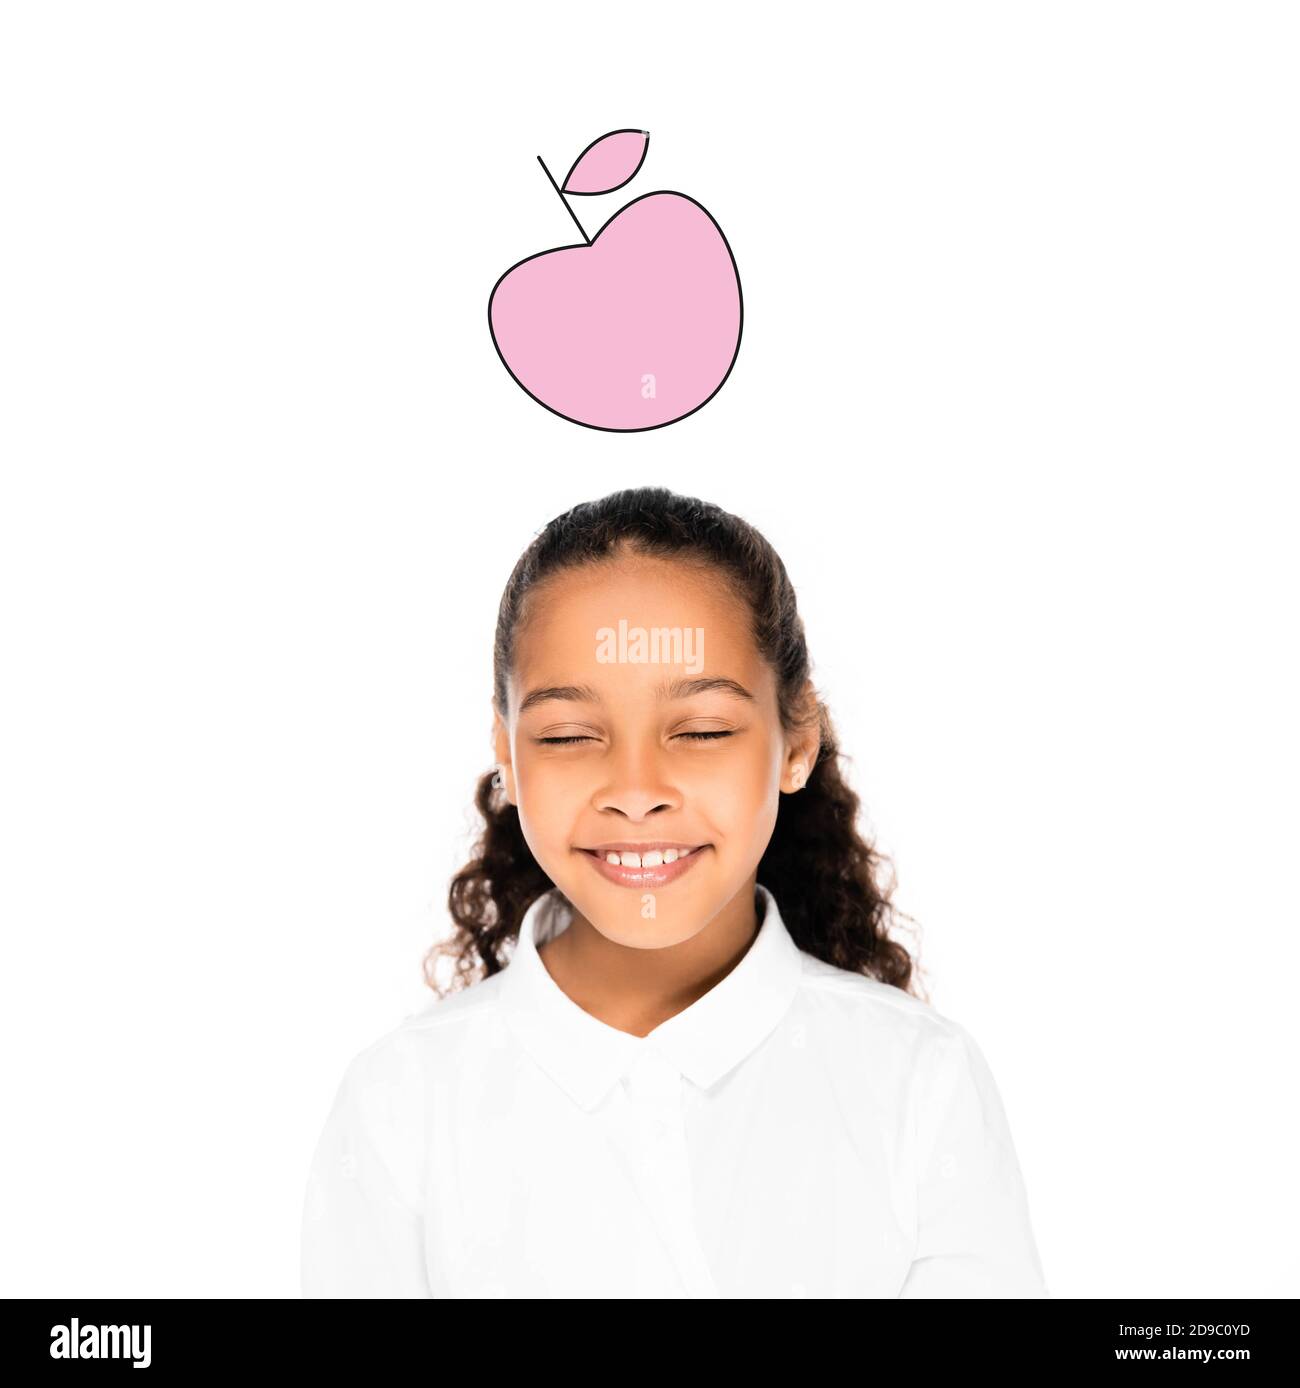 african american schoolgirl smiling with closed eyes isolated on white, pink apple illustration Stock Photo